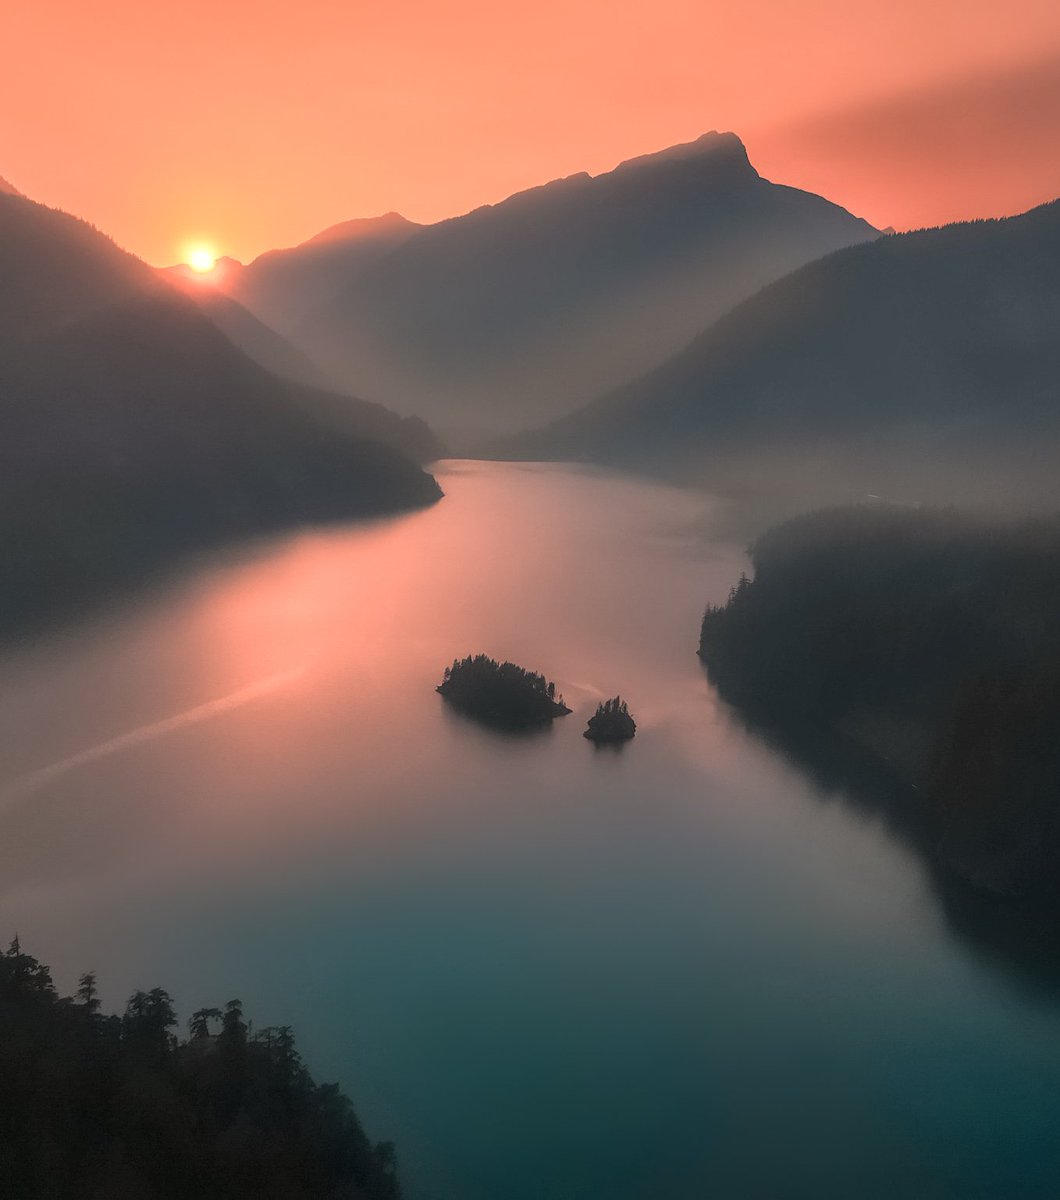 Just one more minute

The last gasps of sun falling on a hazy North Cascades #NationalPark. The teal from the water and orange from the sunset were battling it out. The teal eventually won.